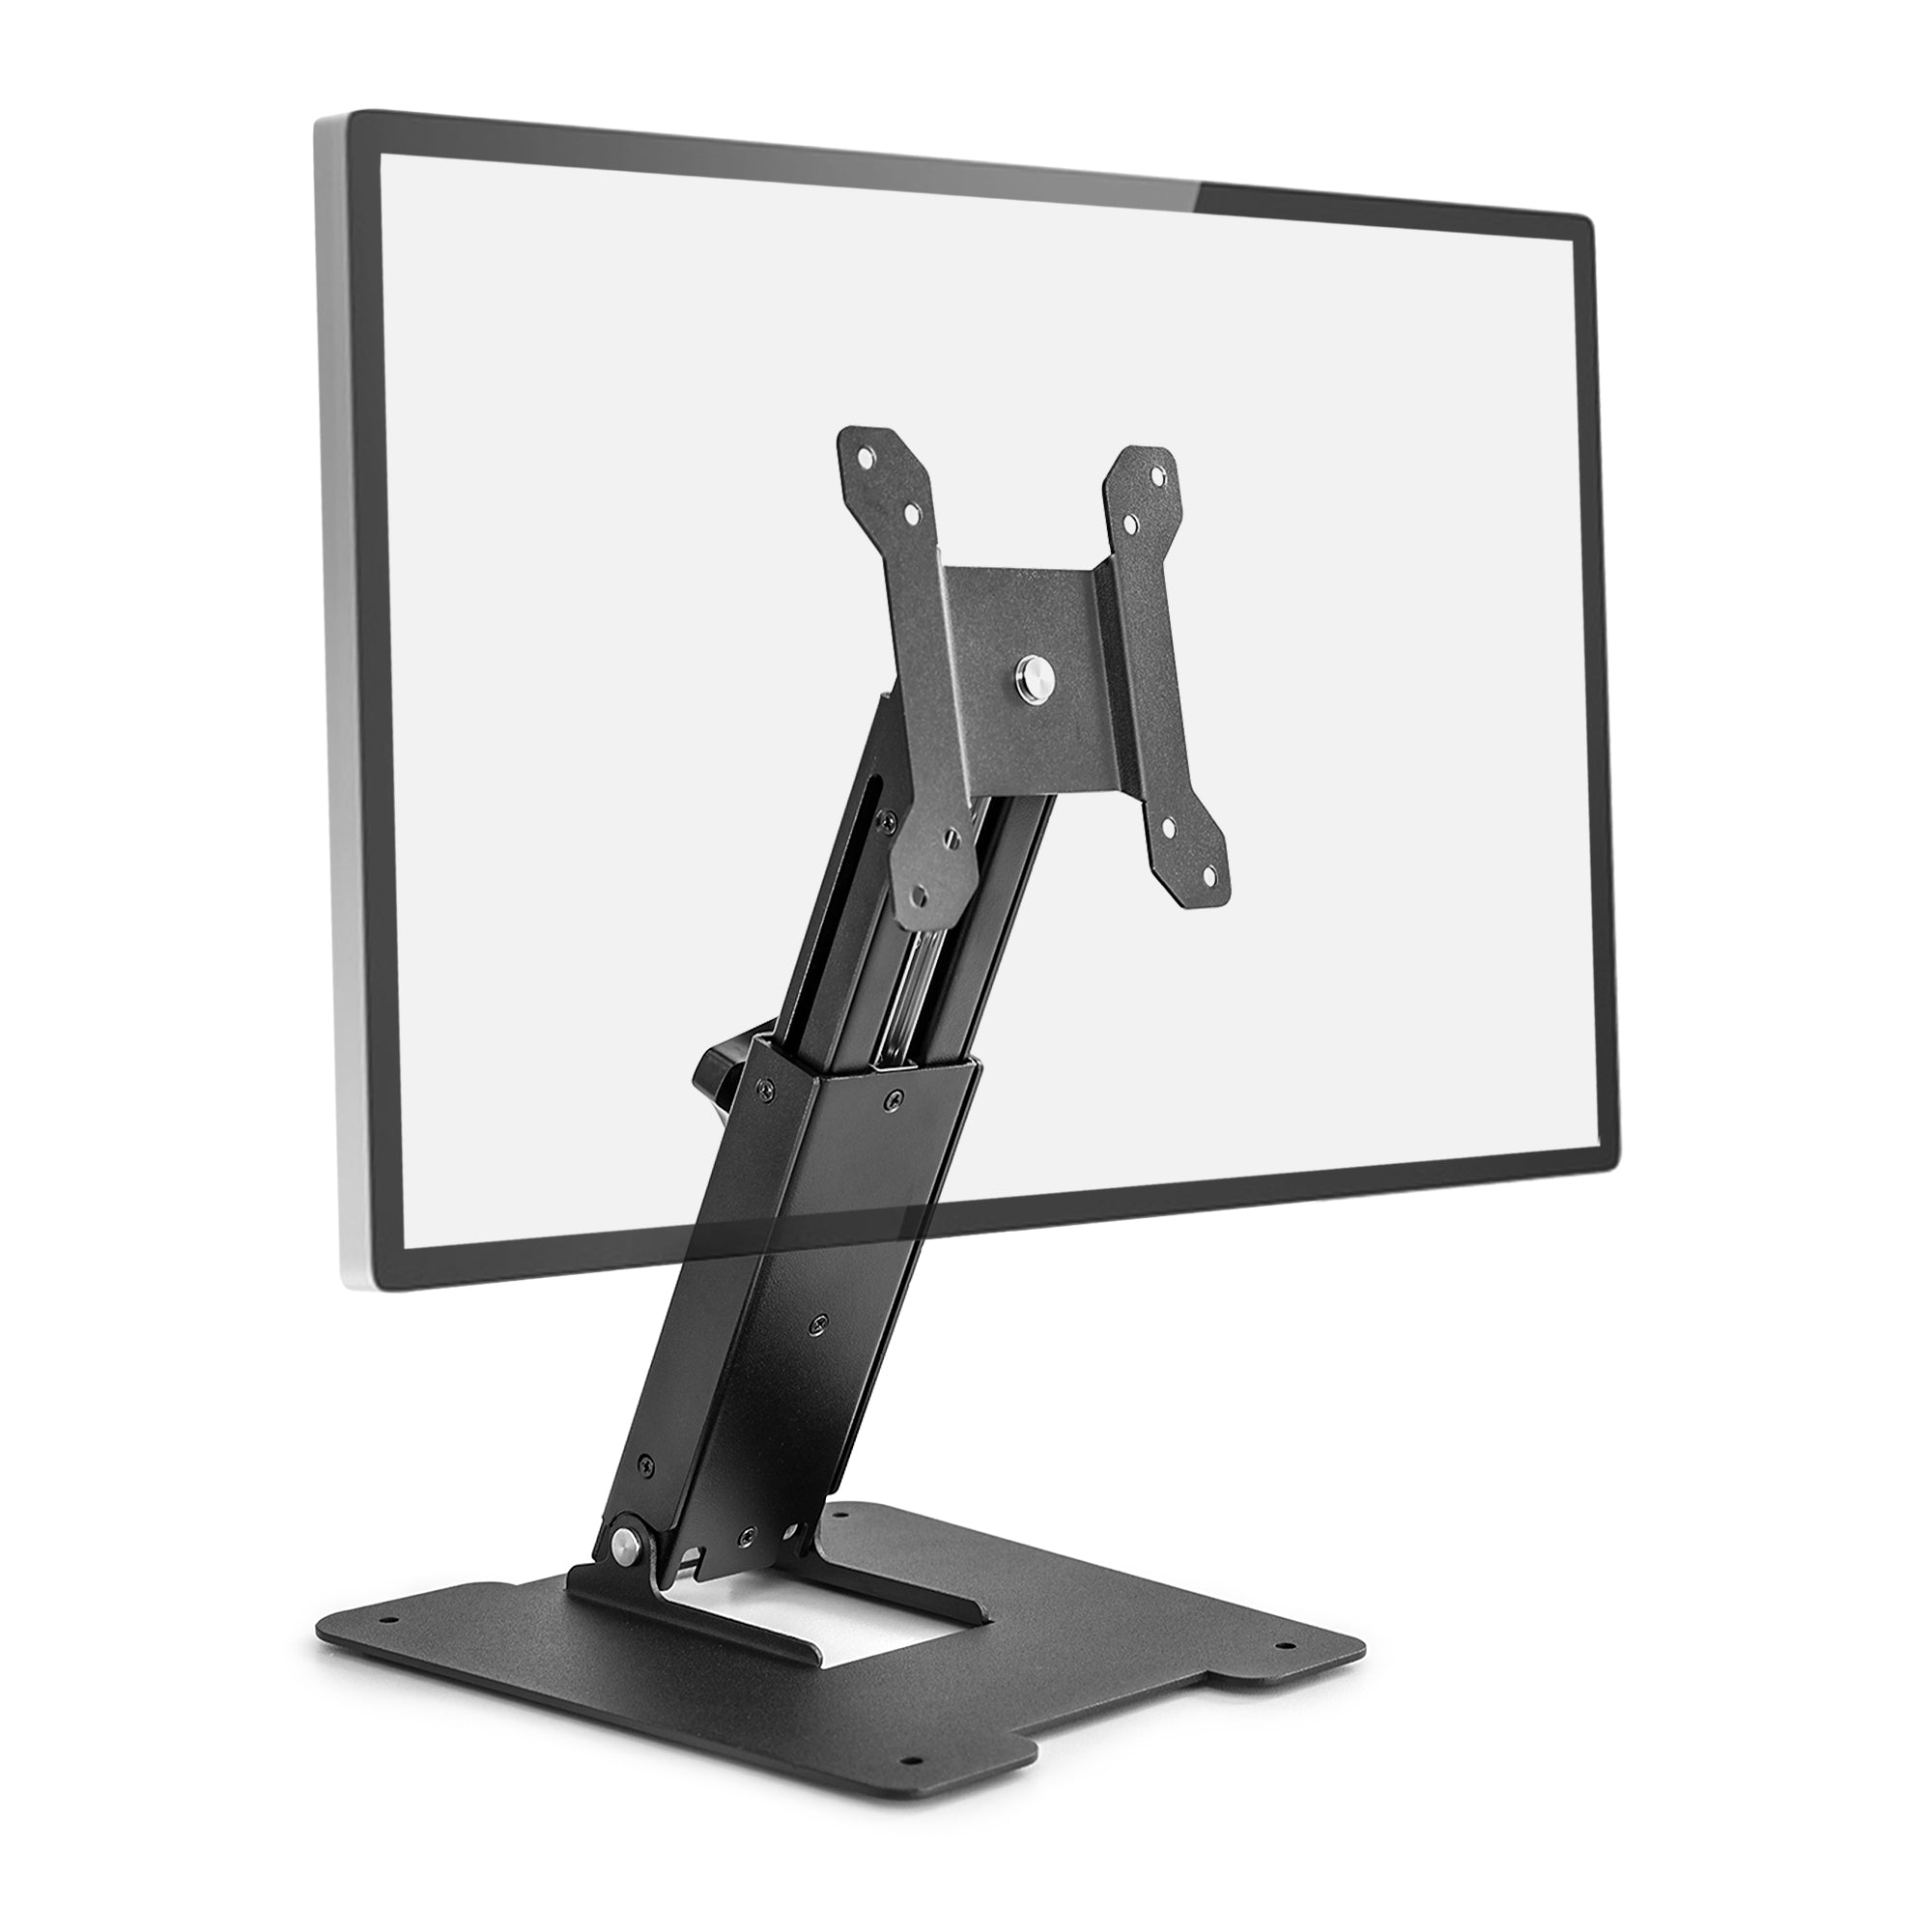 Wearson WS-03S Low Profile Vesa Stand All Metal Holder Sturdy with